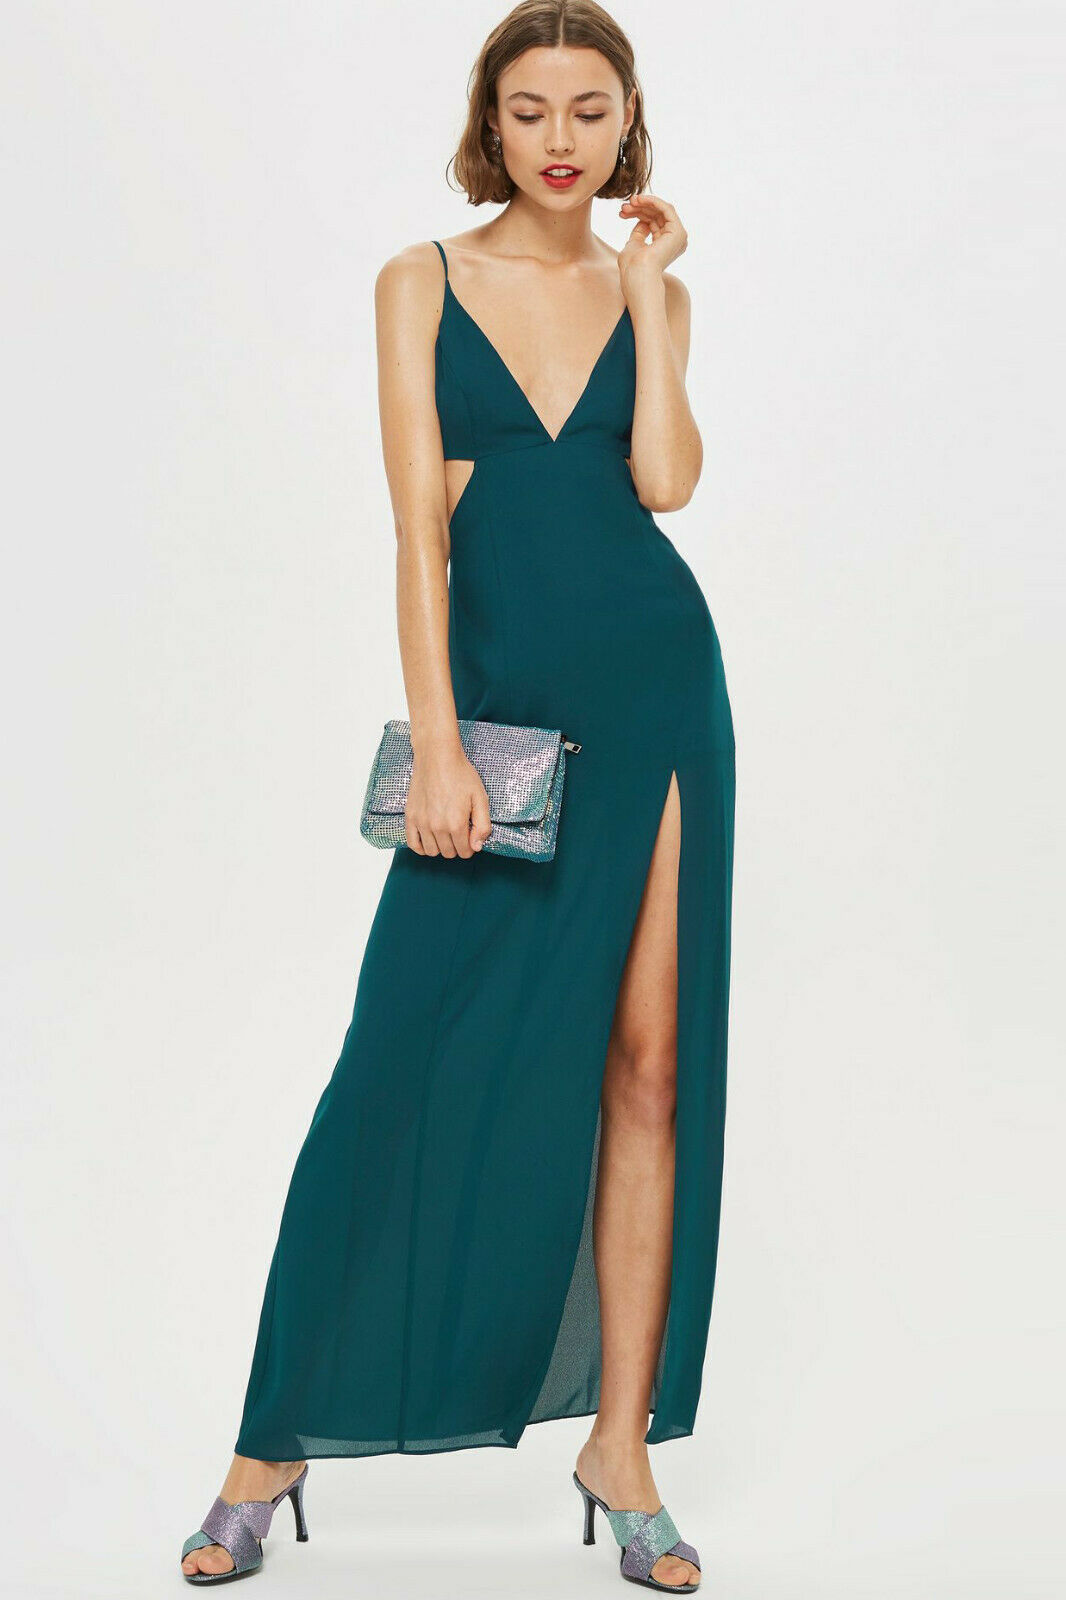 Topshop NEW Cut Out Side Maxi Dress in Teal Green